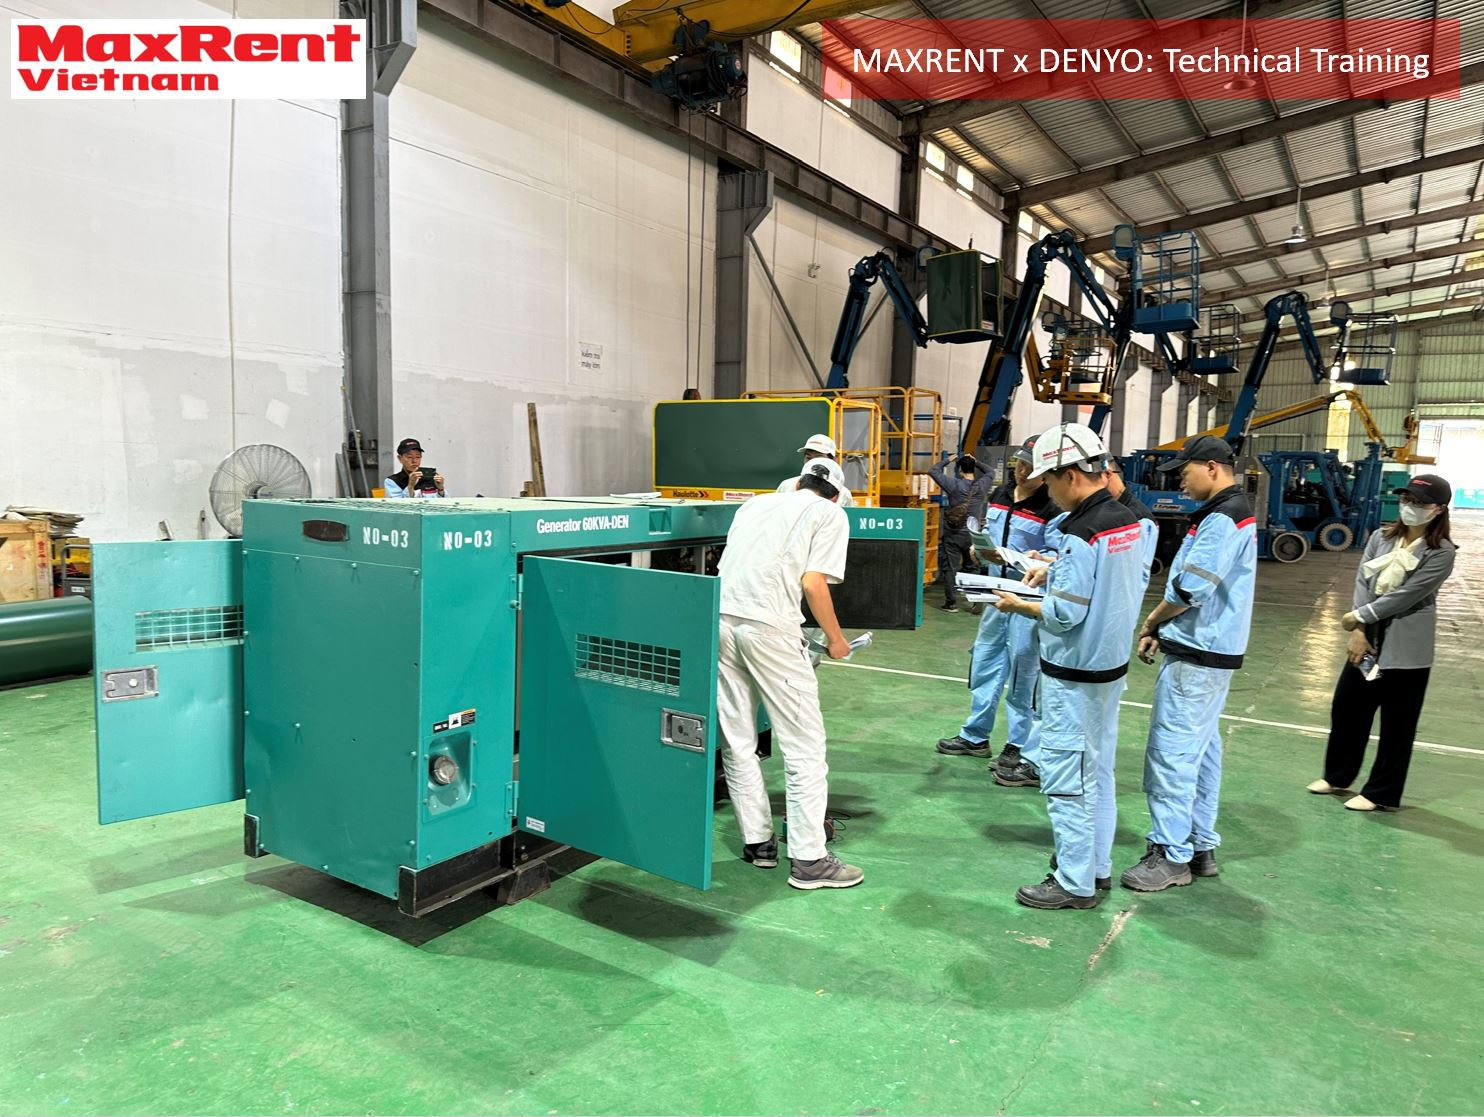 Denyo organized a professional training session on generators for MaxRent technicians